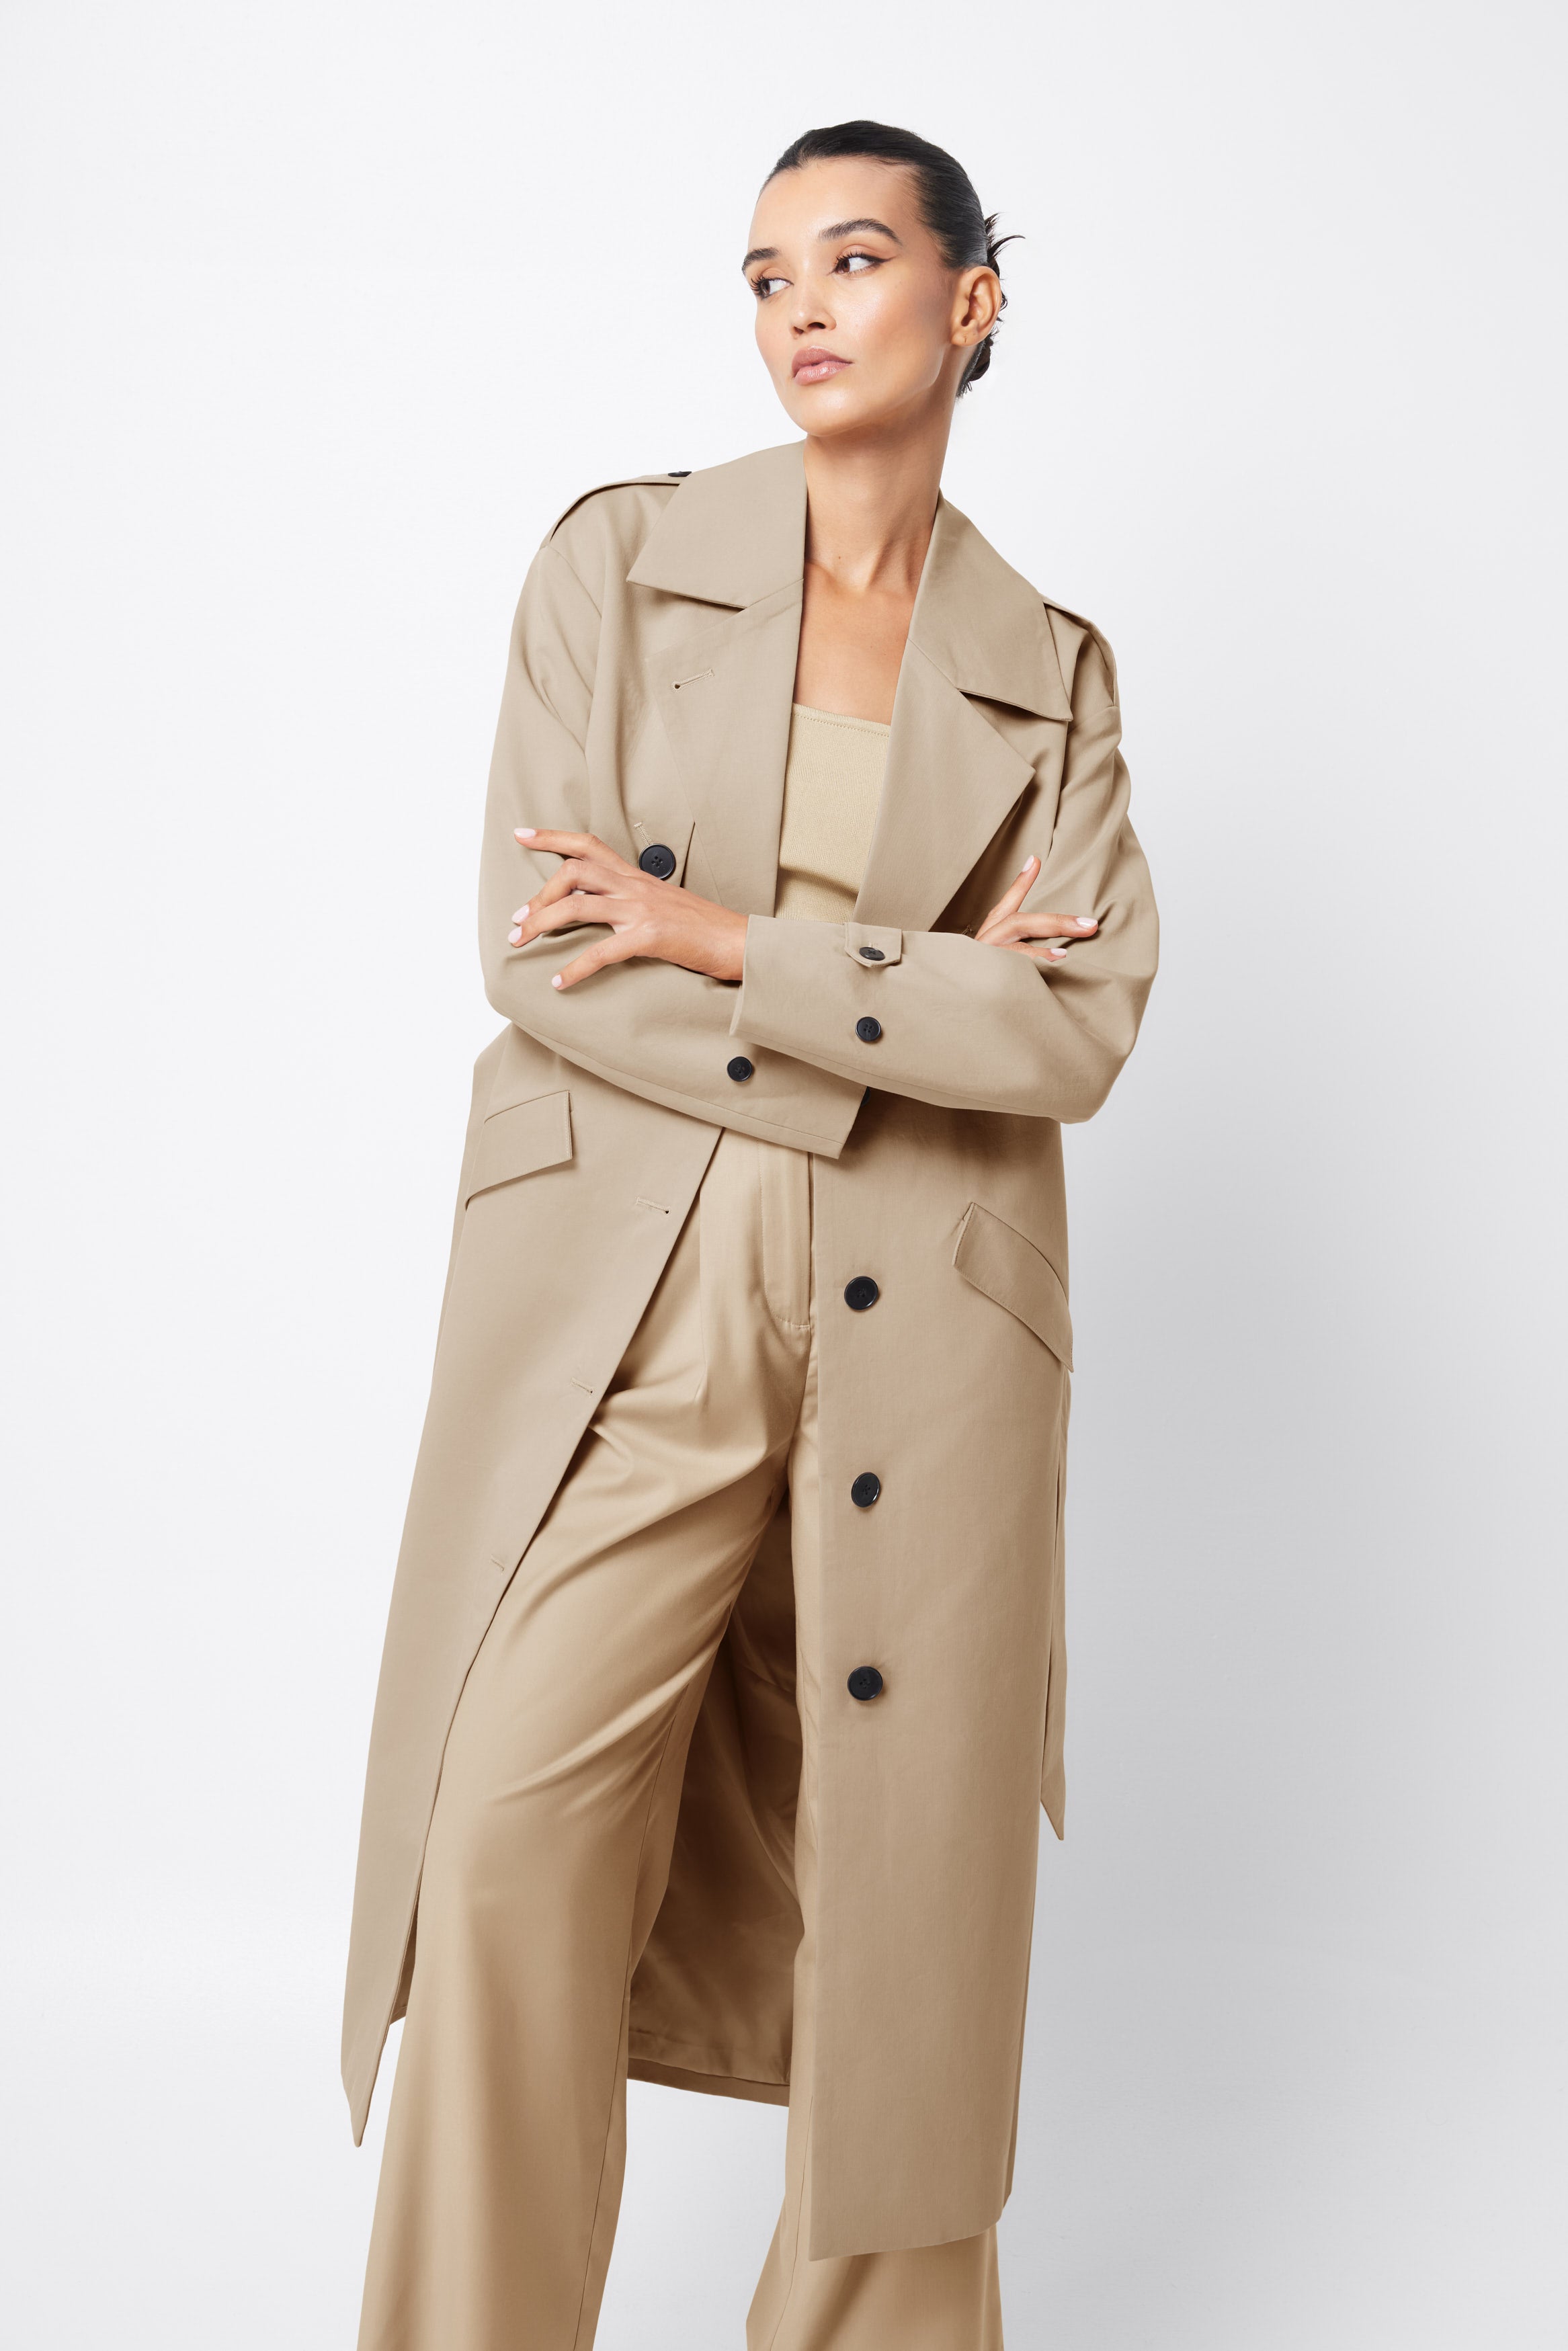 For Keeps Trench Coat - Neutral